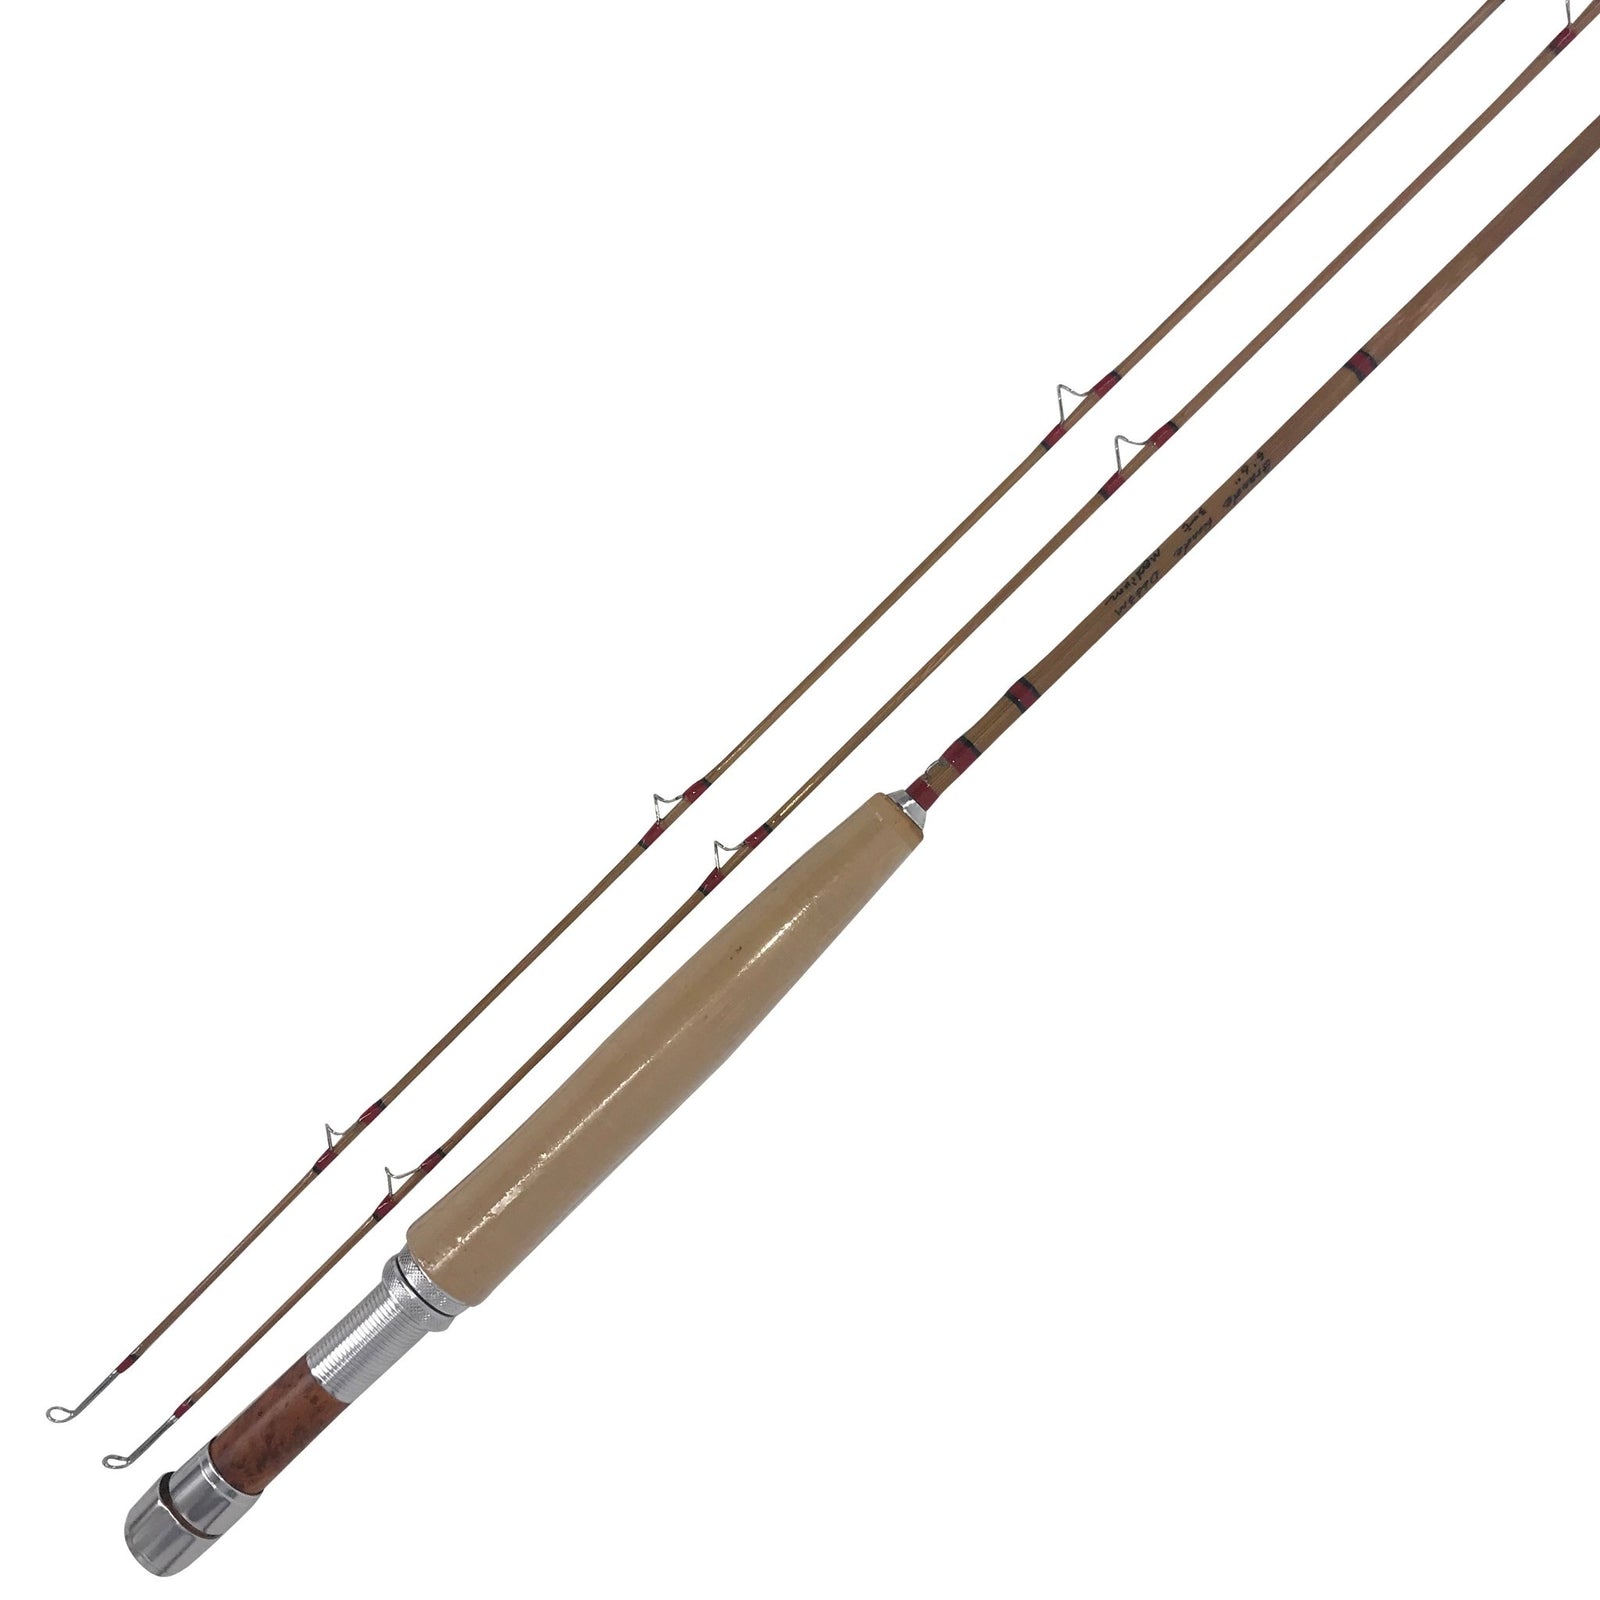 Deluxe Series Bamboo Fly Rods - Headwaters Bamboo